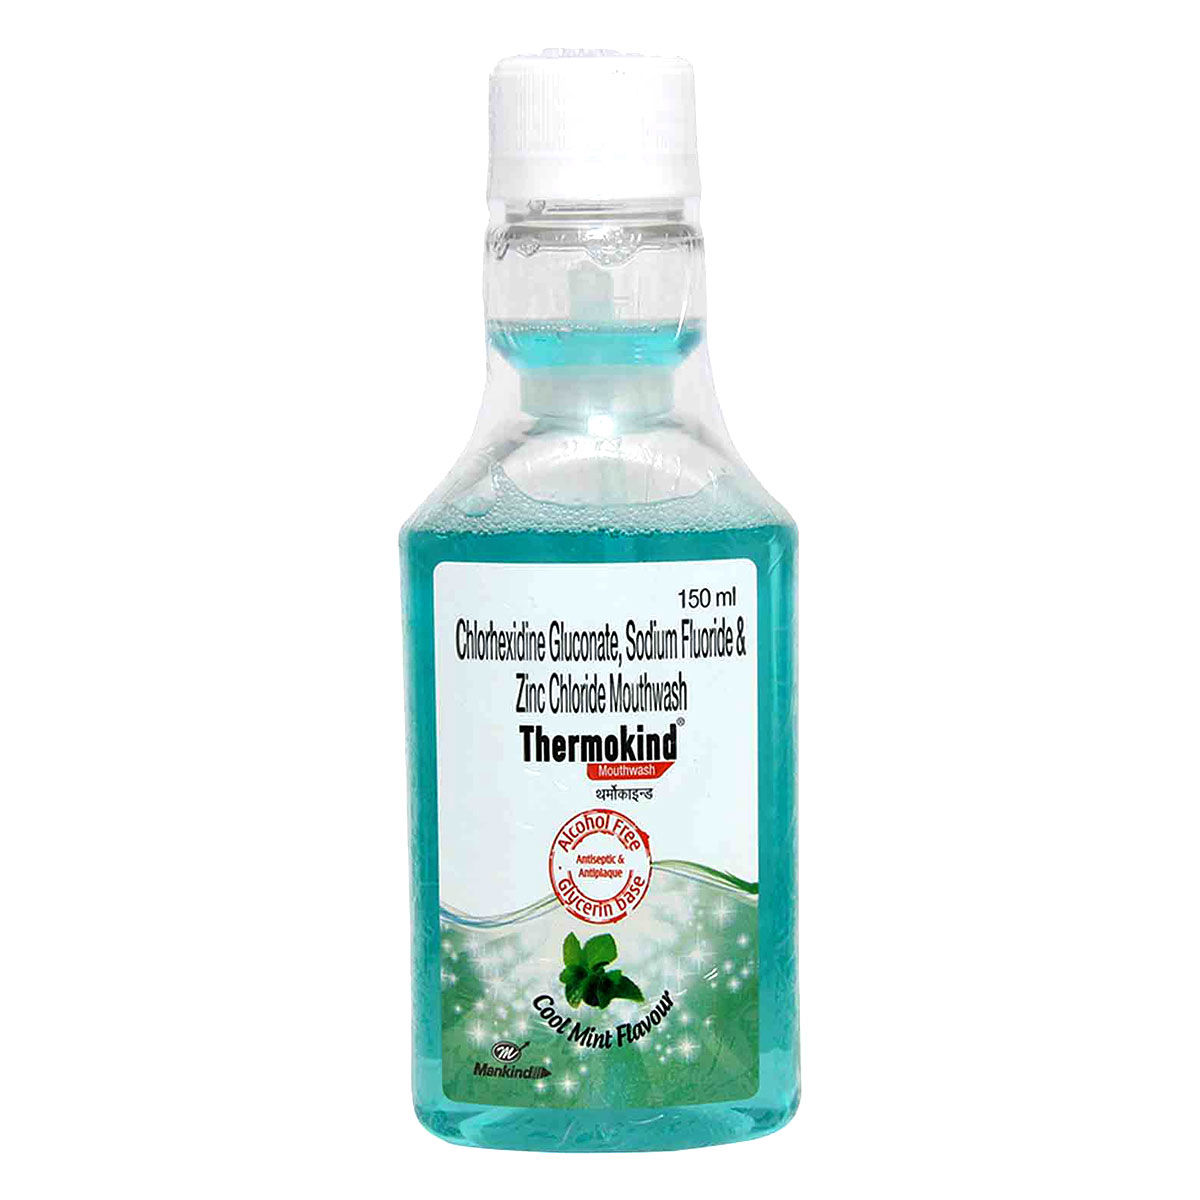 Buy Thermokind Cool Mint Flavour Mouth Wash, 150 ml Online